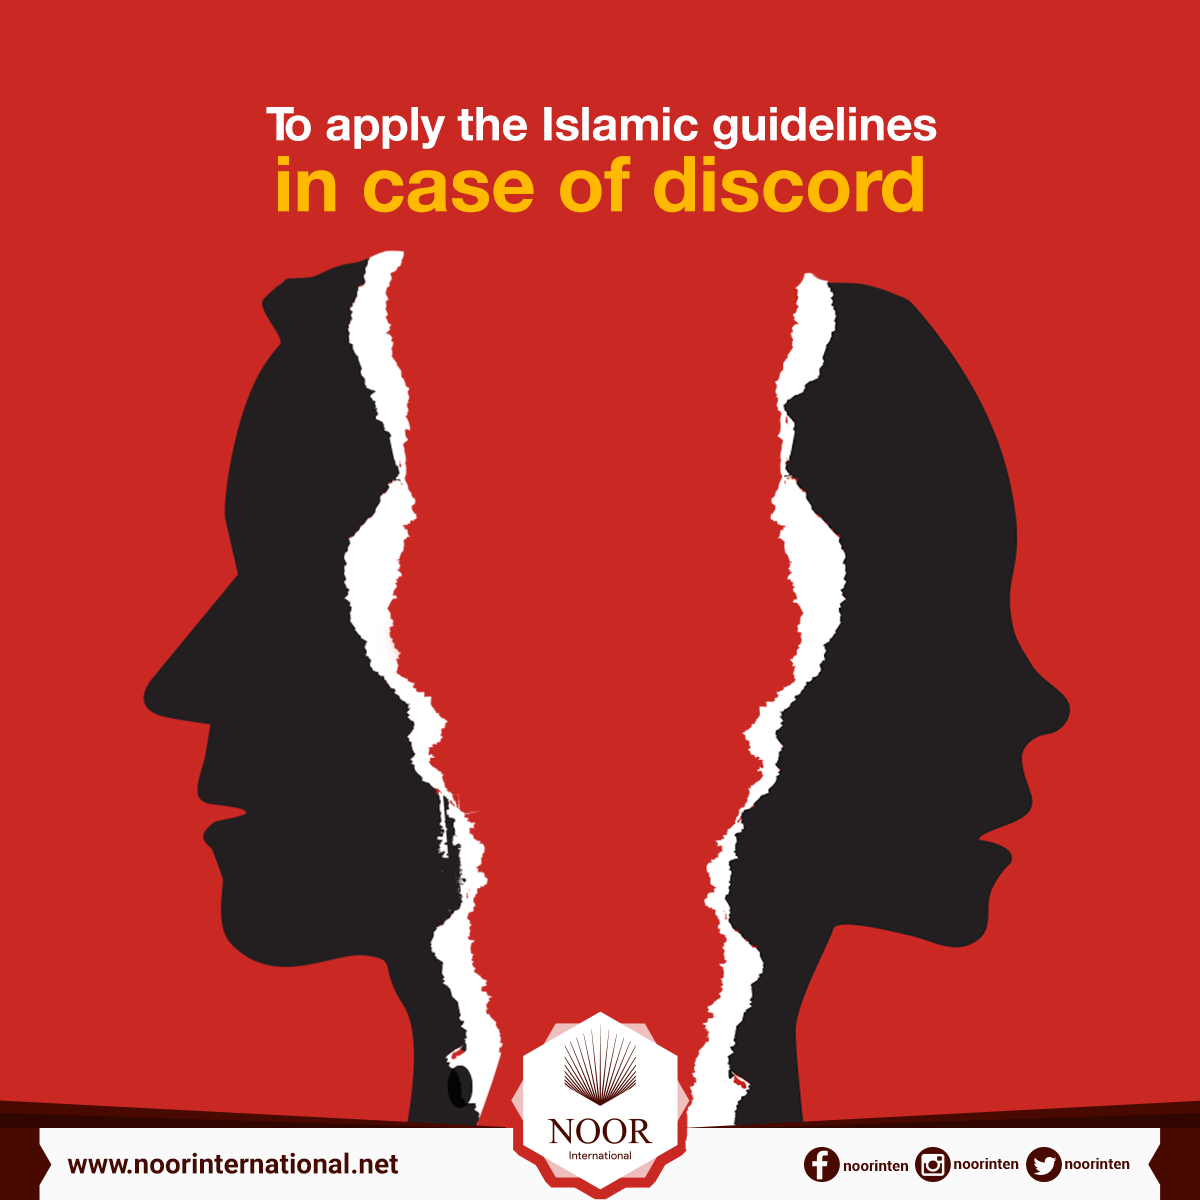 To apply the Islamic guidelines in case of discord